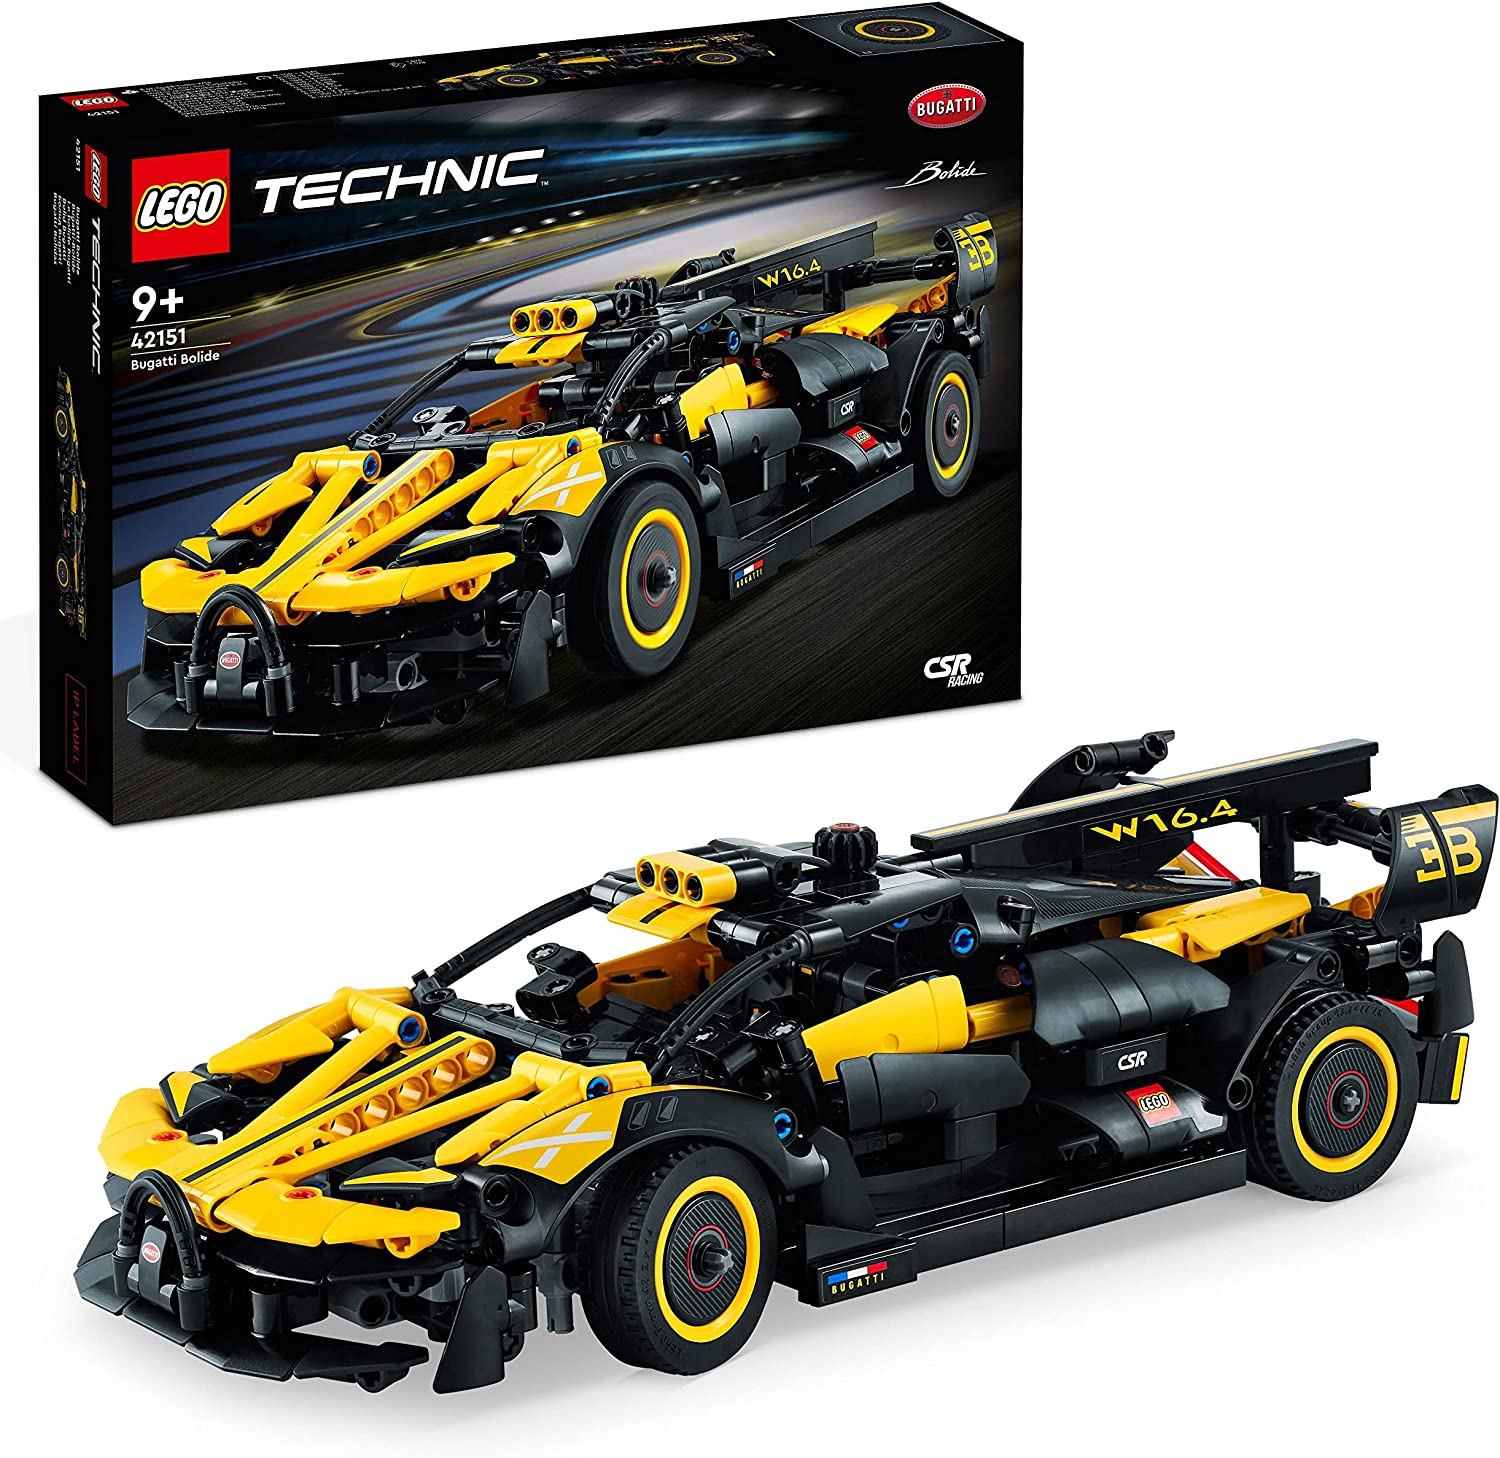 LEGO 42151 Technic Bugatti Bolide Car Model Kit Sports Car Toy Iconic Collectable Car Kit 9 Years and Above